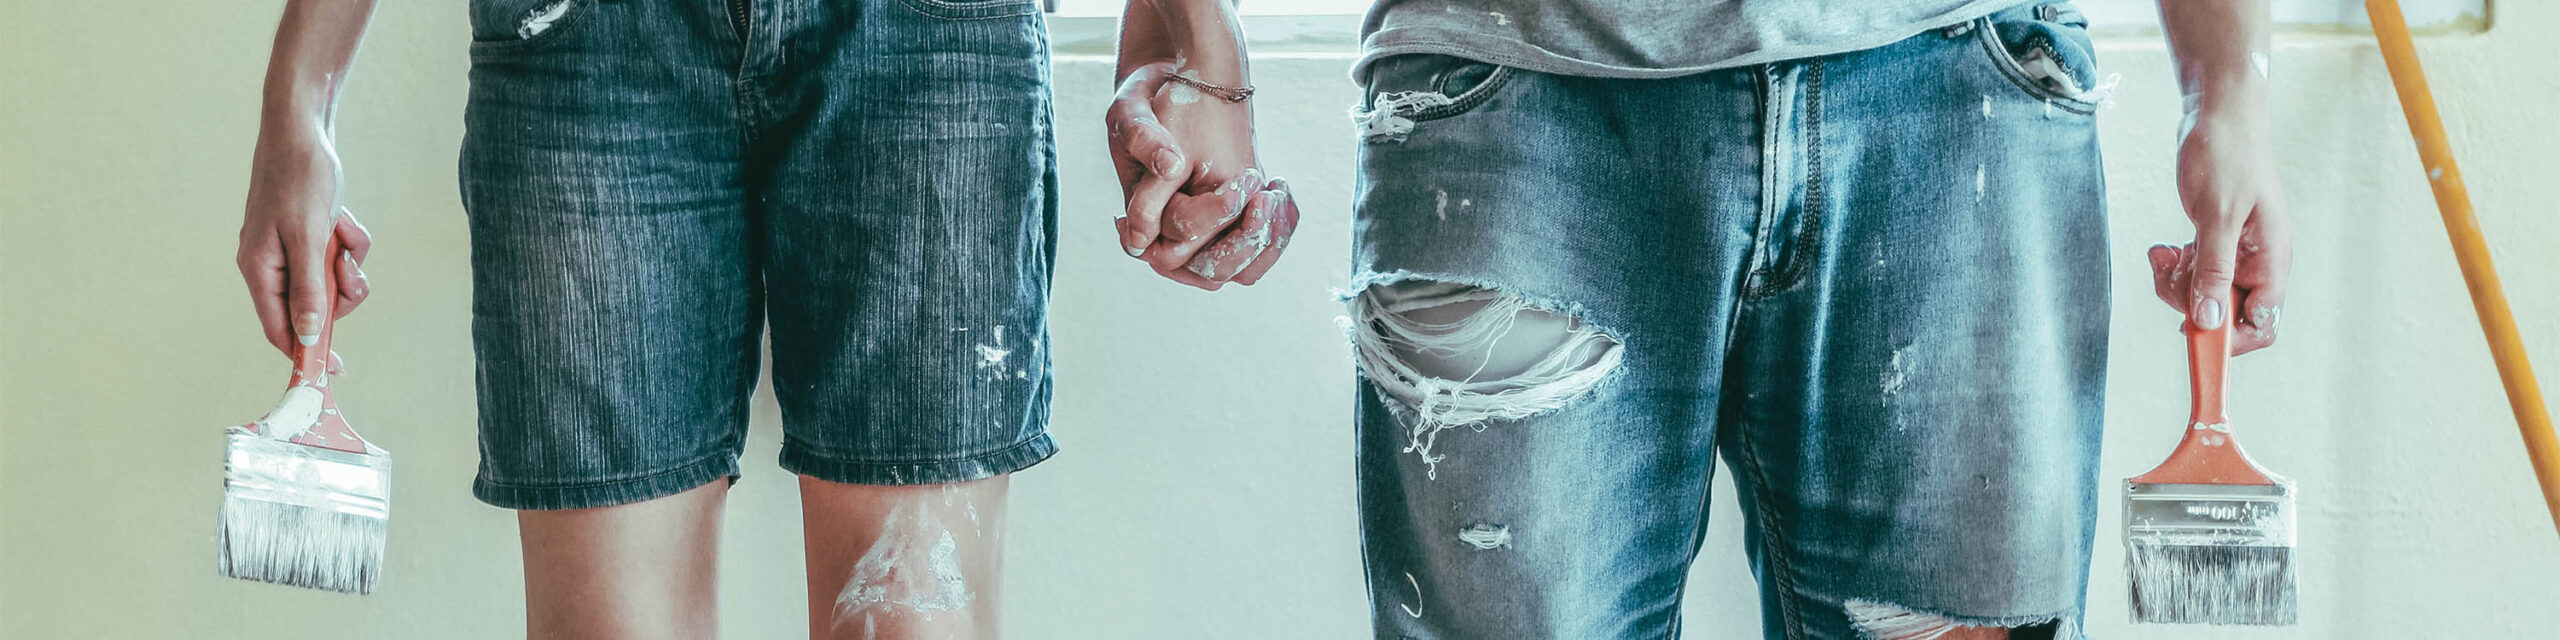 Female and male hips and hands closeup wearing denim and holding paintbrushes while holding hands